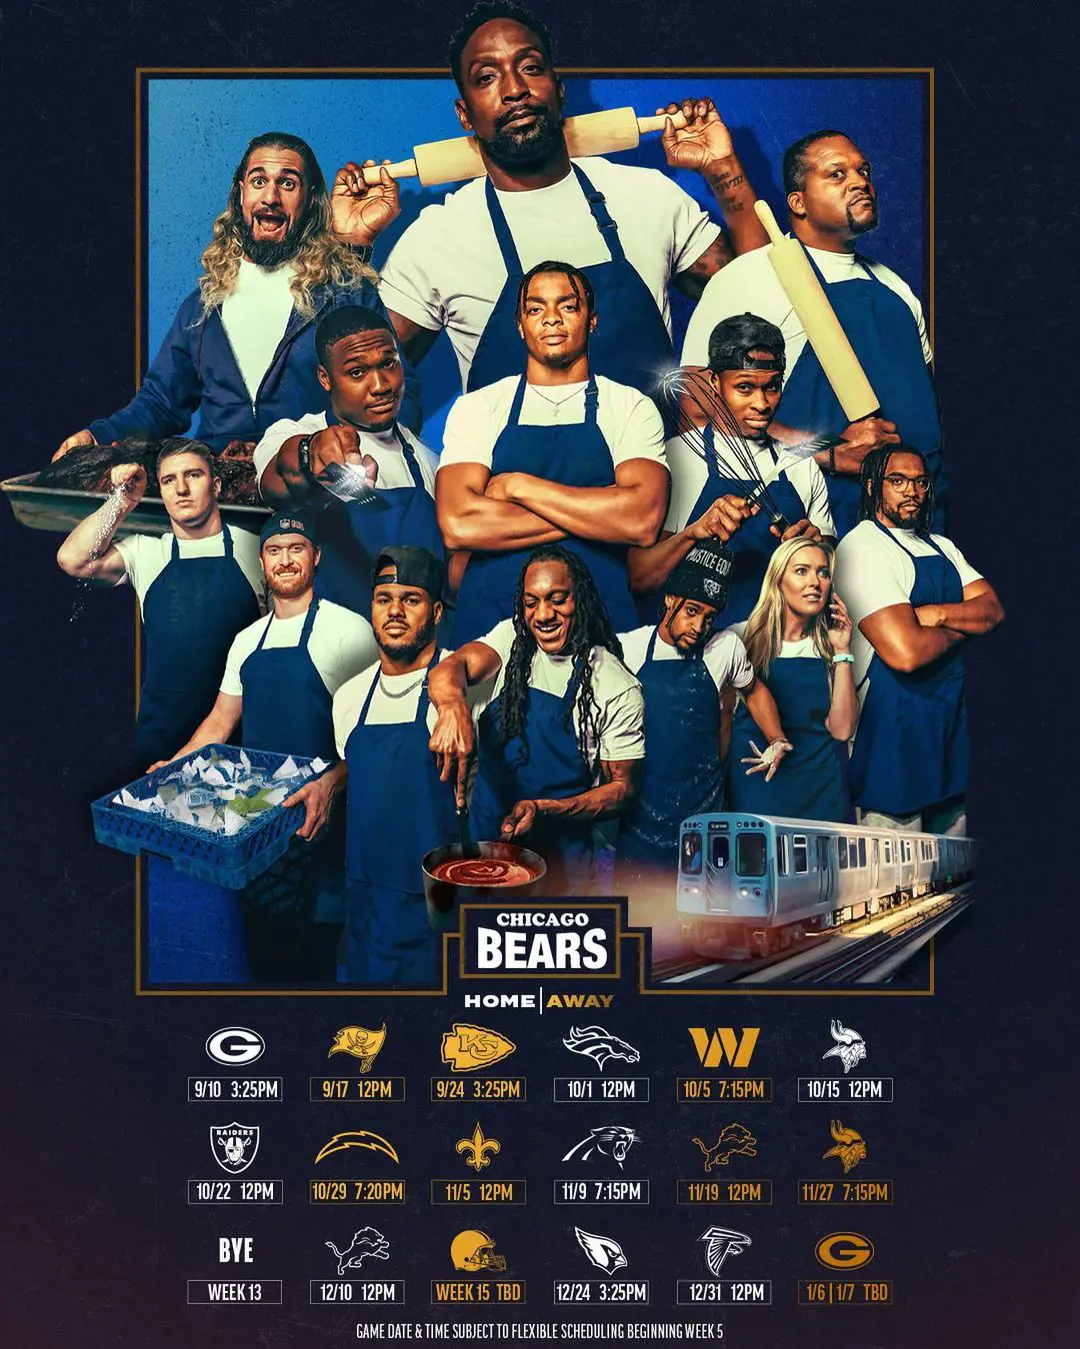 Chicago players enacting The Bear TV show. They listed their 2023 schedule as well